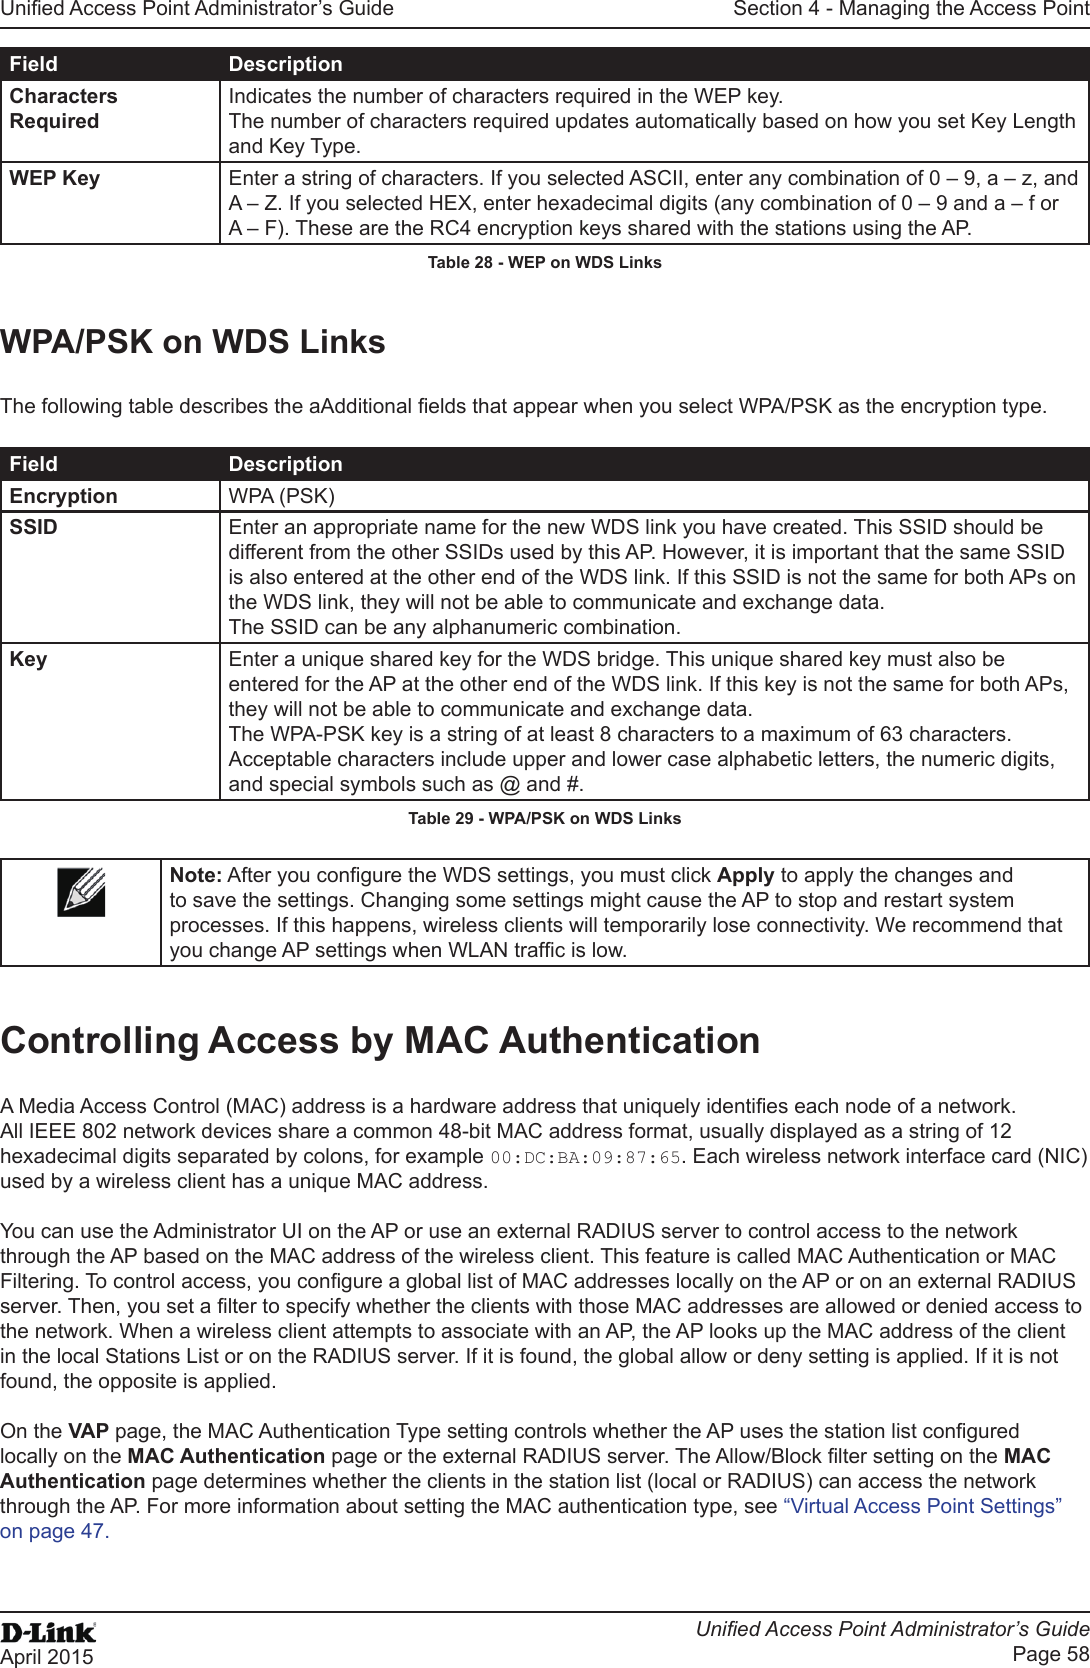 Unied Access Point Administrator’s GuideUnied Access Point Administrator’s GuidePage 58April 2015Section 4 - Managing the Access PointField DescriptionCharacters RequiredIndicates the number of characters required in the WEP key.The number of characters required updates automatically based on how you set Key Length and Key Type.WEP Key Enter a string of characters. If you selected ASCII, enter any combination of 0 – 9, a – z, and A – Z. If you selected HEX, enter hexadecimal digits (any combination of 0 – 9 and a – f or A – F). These are the RC4 encryption keys shared with the stations using the AP.Table 28 - WEP on WDS LinksWPA/PSK on WDS LinksThe following table describes the aAdditional elds that appear when you select WPA/PSK as the encryption type.Field DescriptionEncryption WPA (PSK)SSID Enter an appropriate name for the new WDS link you have created. This SSID should be different from the other SSIDs used by this AP. However, it is important that the same SSID is also entered at the other end of the WDS link. If this SSID is not the same for both APs on the WDS link, they will not be able to communicate and exchange data.The SSID can be any alphanumeric combination.Key Enter a unique shared key for the WDS bridge. This unique shared key must also be entered for the AP at the other end of the WDS link. If this key is not the same for both APs, they will not be able to communicate and exchange data.The WPA-PSK key is a string of at least 8 characters to a maximum of 63 characters. Acceptable characters include upper and lower case alphabetic letters, the numeric digits, and special symbols such as @ and #.Table 29 - WPA/PSK on WDS LinksNote: After you congure the WDS settings, you must click Apply to apply the changes and to save the settings. Changing some settings might cause the AP to stop and restart system processes. If this happens, wireless clients will temporarily lose connectivity. We recommend that you change AP settings when WLAN trafc is low. Controlling Access by MAC AuthenticationA Media Access Control (MAC) address is a hardware address that uniquely identies each node of a network. All IEEE 802 network devices share a common 48-bit MAC address format, usually displayed as a string of 12 hexadecimal digits separated by colons, for example 00:DC:BA:09:87:65. Each wireless network interface card (NIC) used by a wireless client has a unique MAC address.You can use the Administrator UI on the AP or use an external RADIUS server to control access to the network through the AP based on the MAC address of the wireless client. This feature is called MAC Authentication or MAC Filtering. To control access, you congure a global list of MAC addresses locally on the AP or on an external RADIUS server. Then, you set a lter to specify whether the clients with those MAC addresses are allowed or denied access to the network. When a wireless client attempts to associate with an AP, the AP looks up the MAC address of the client in the local Stations List or on the RADIUS server. If it is found, the global allow or deny setting is applied. If it is not found, the opposite is applied.On the VAP page, the MAC Authentication Type setting controls whether the AP uses the station list congured locally on the MAC Authentication page or the external RADIUS server. The Allow/Block lter setting on the MAC Authentication page determines whether the clients in the station list (local or RADIUS) can access the network through the AP. For more information about setting the MAC authentication type, see “Virtual Access Point Settings” on page 47.